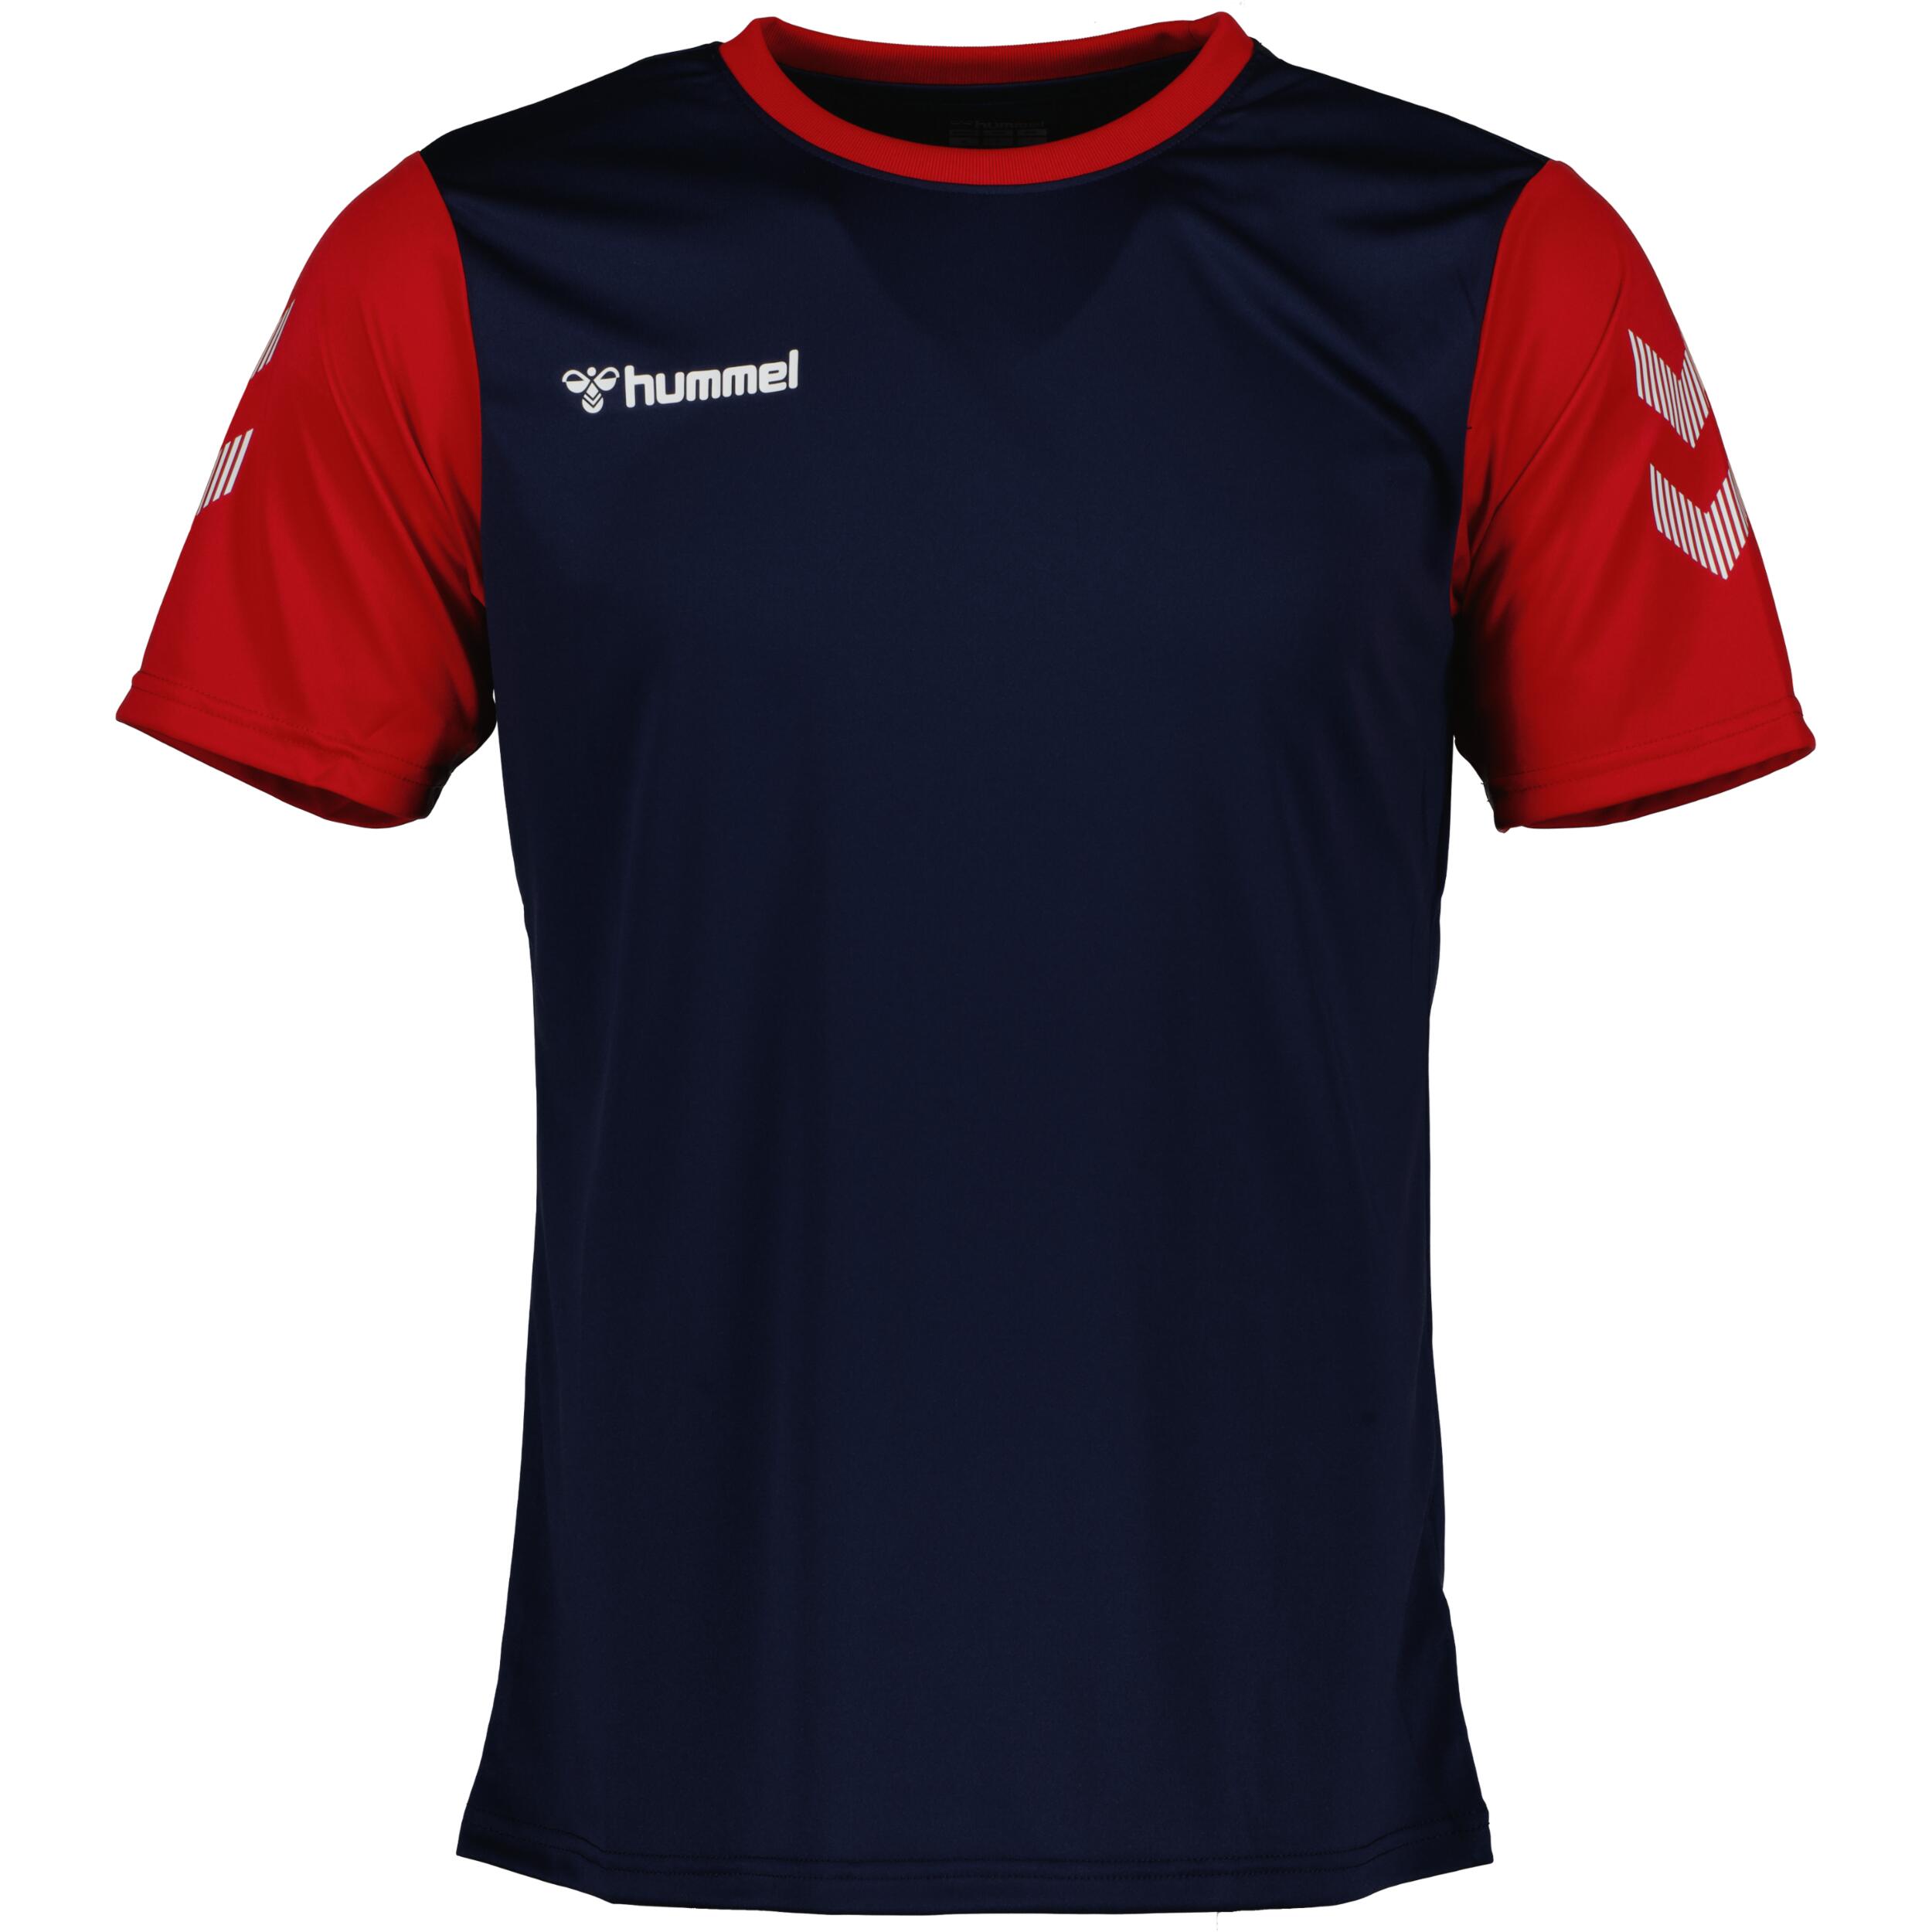 Match jersey for men, great for football, in marine/red 1/3